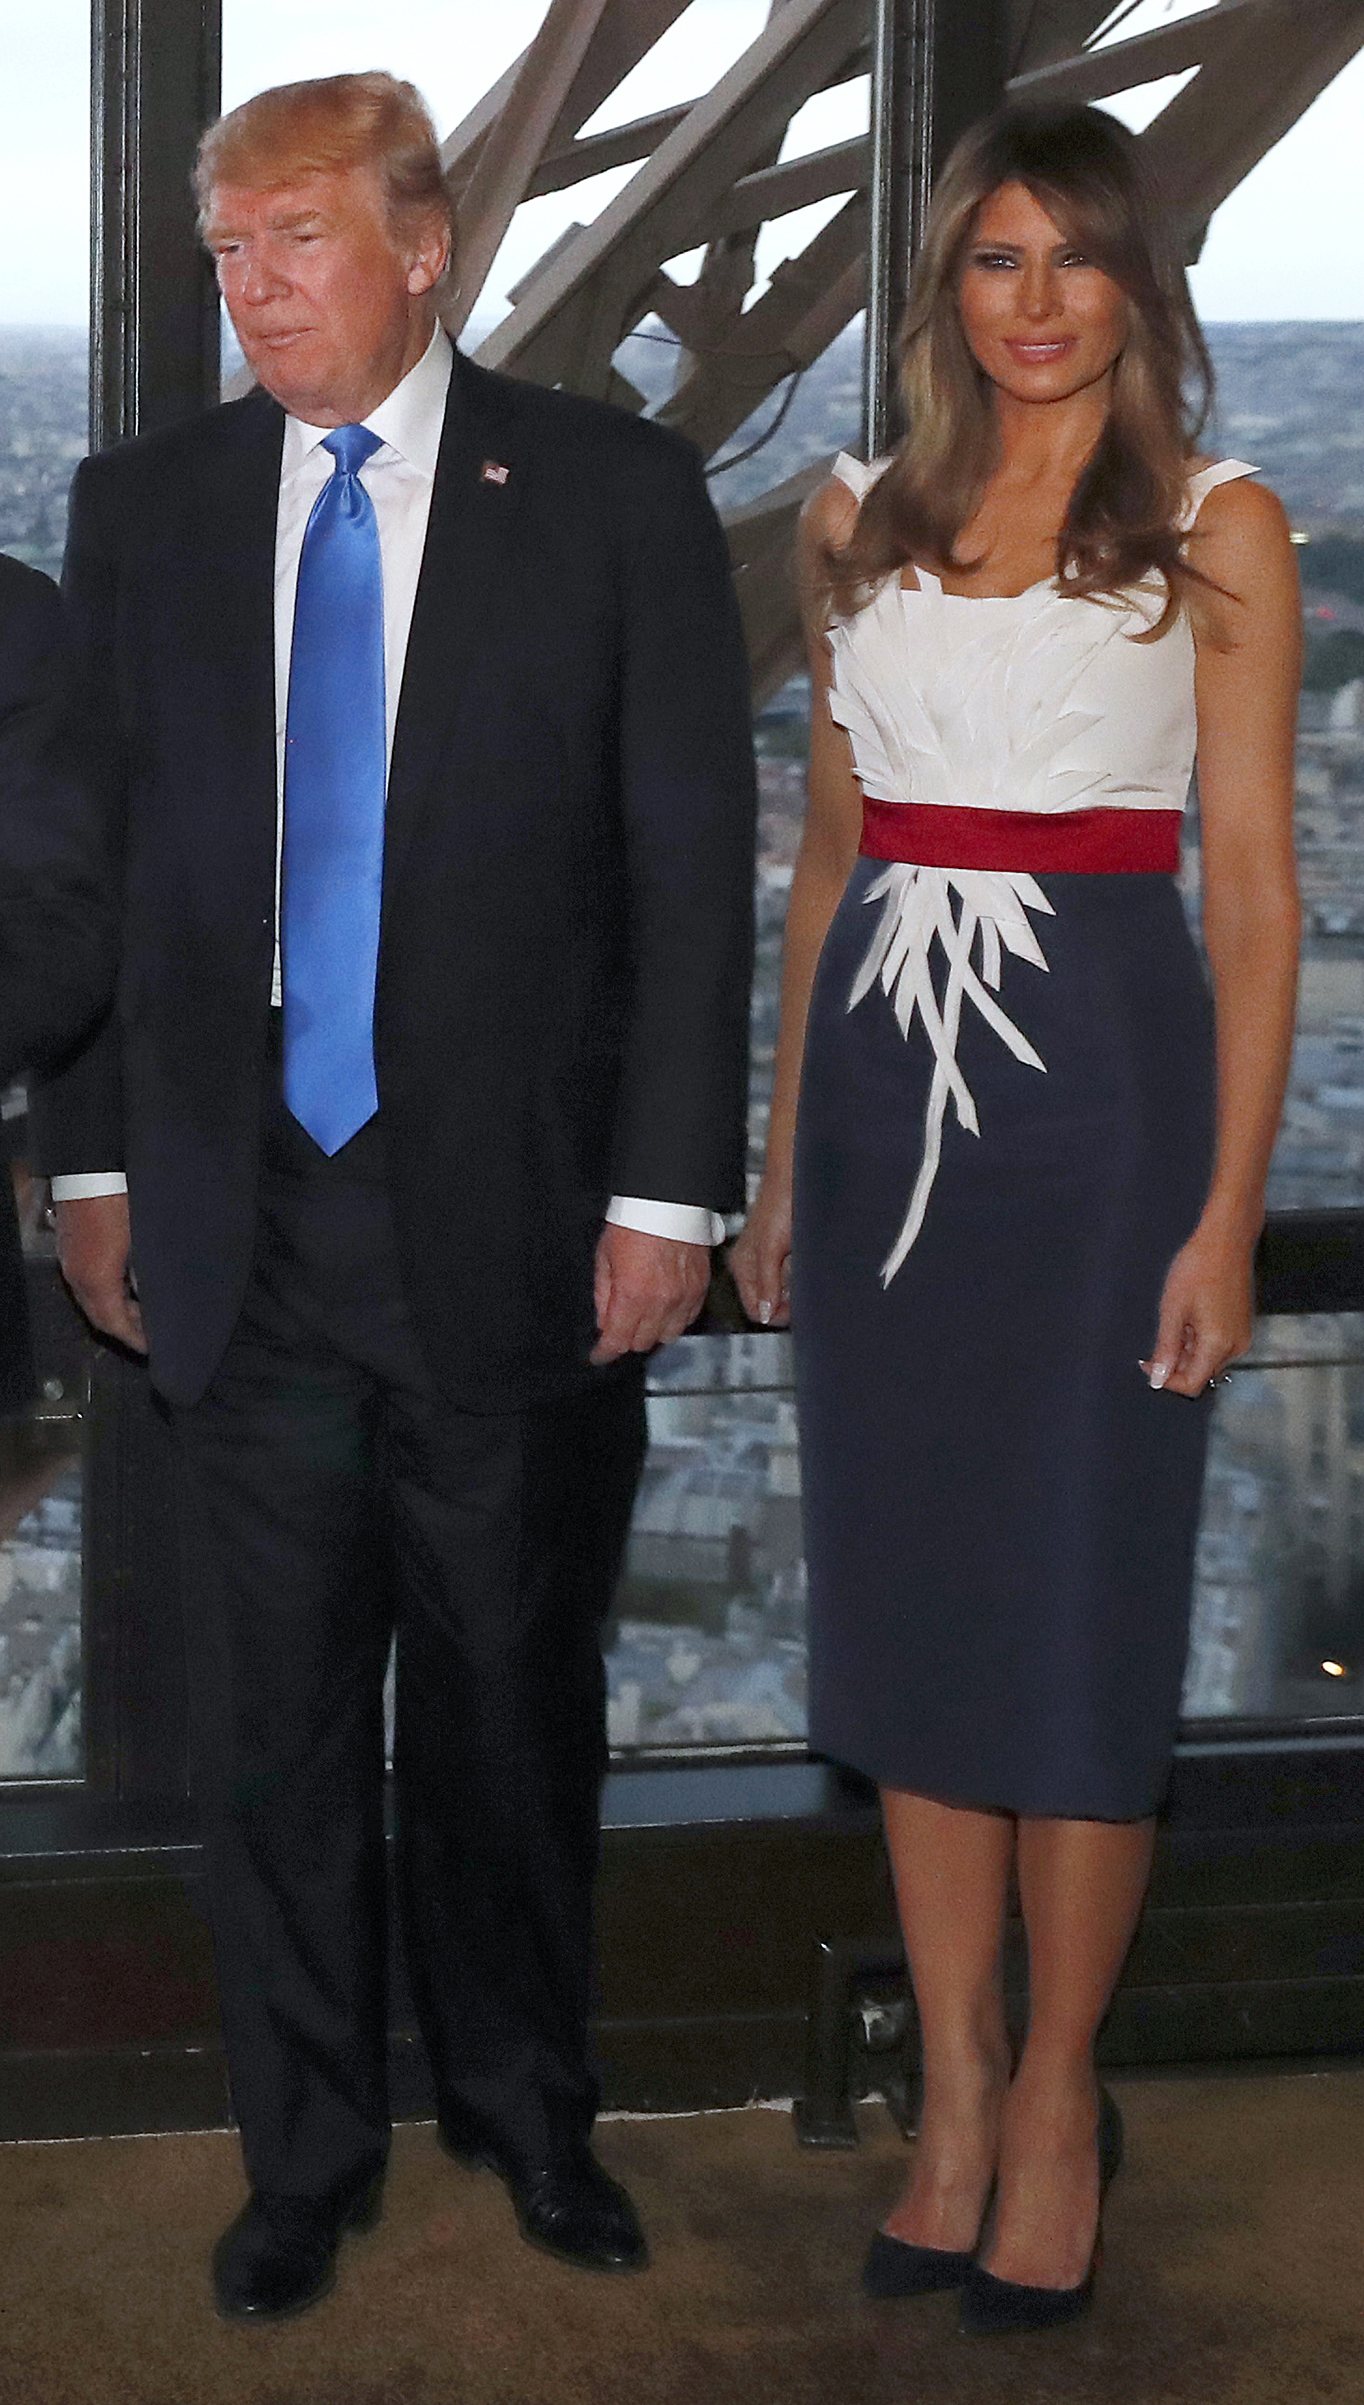 President Donald Trump (L) and First Lady Melania Trump (R) in a dress created by Hervé Pierre, pose upon their arrival for a dinner with French President and his wife, at Le Jules Verne Restaurant on the Eiffel Tower in Paris, on July 13, 2017..